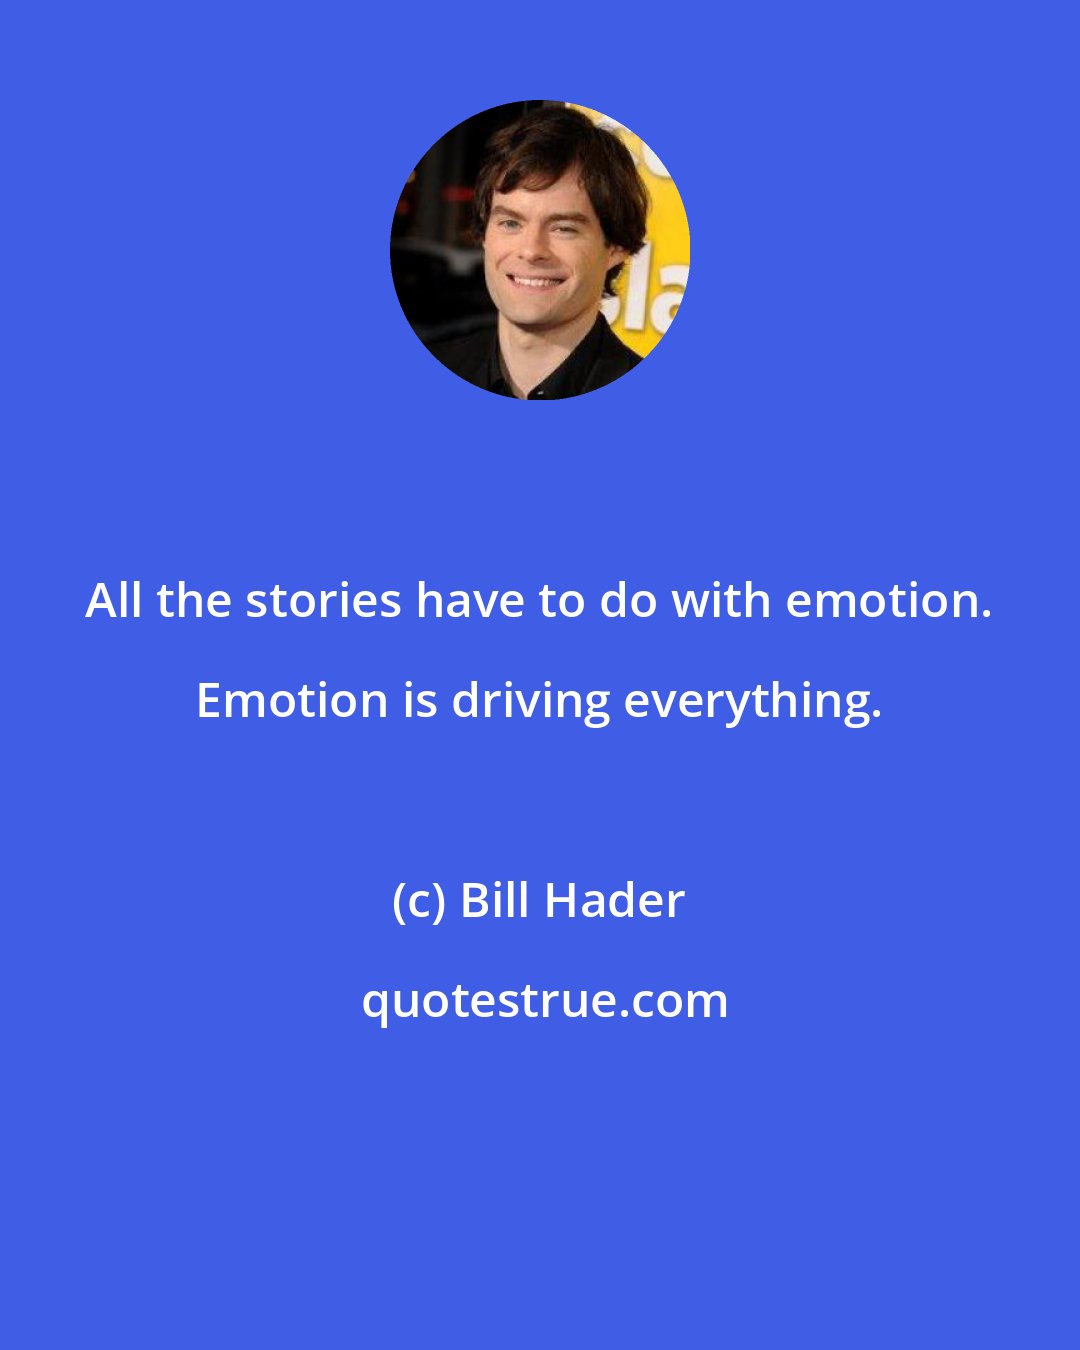 Bill Hader: All the stories have to do with emotion. Emotion is driving everything.